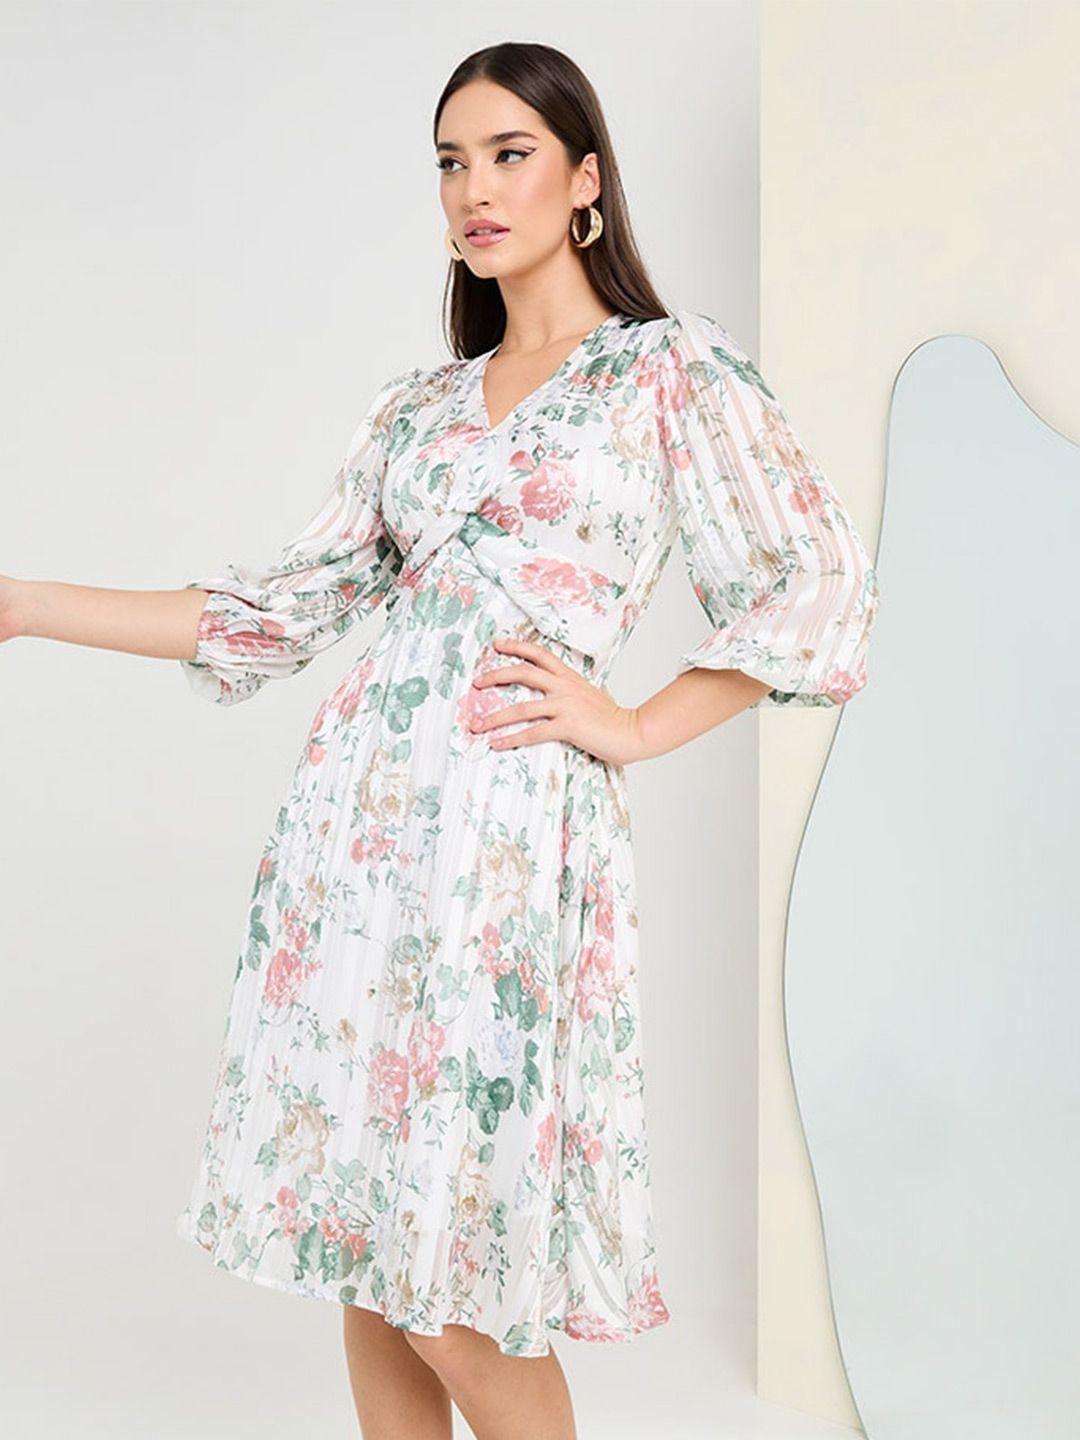 styli floral printed a-line dress